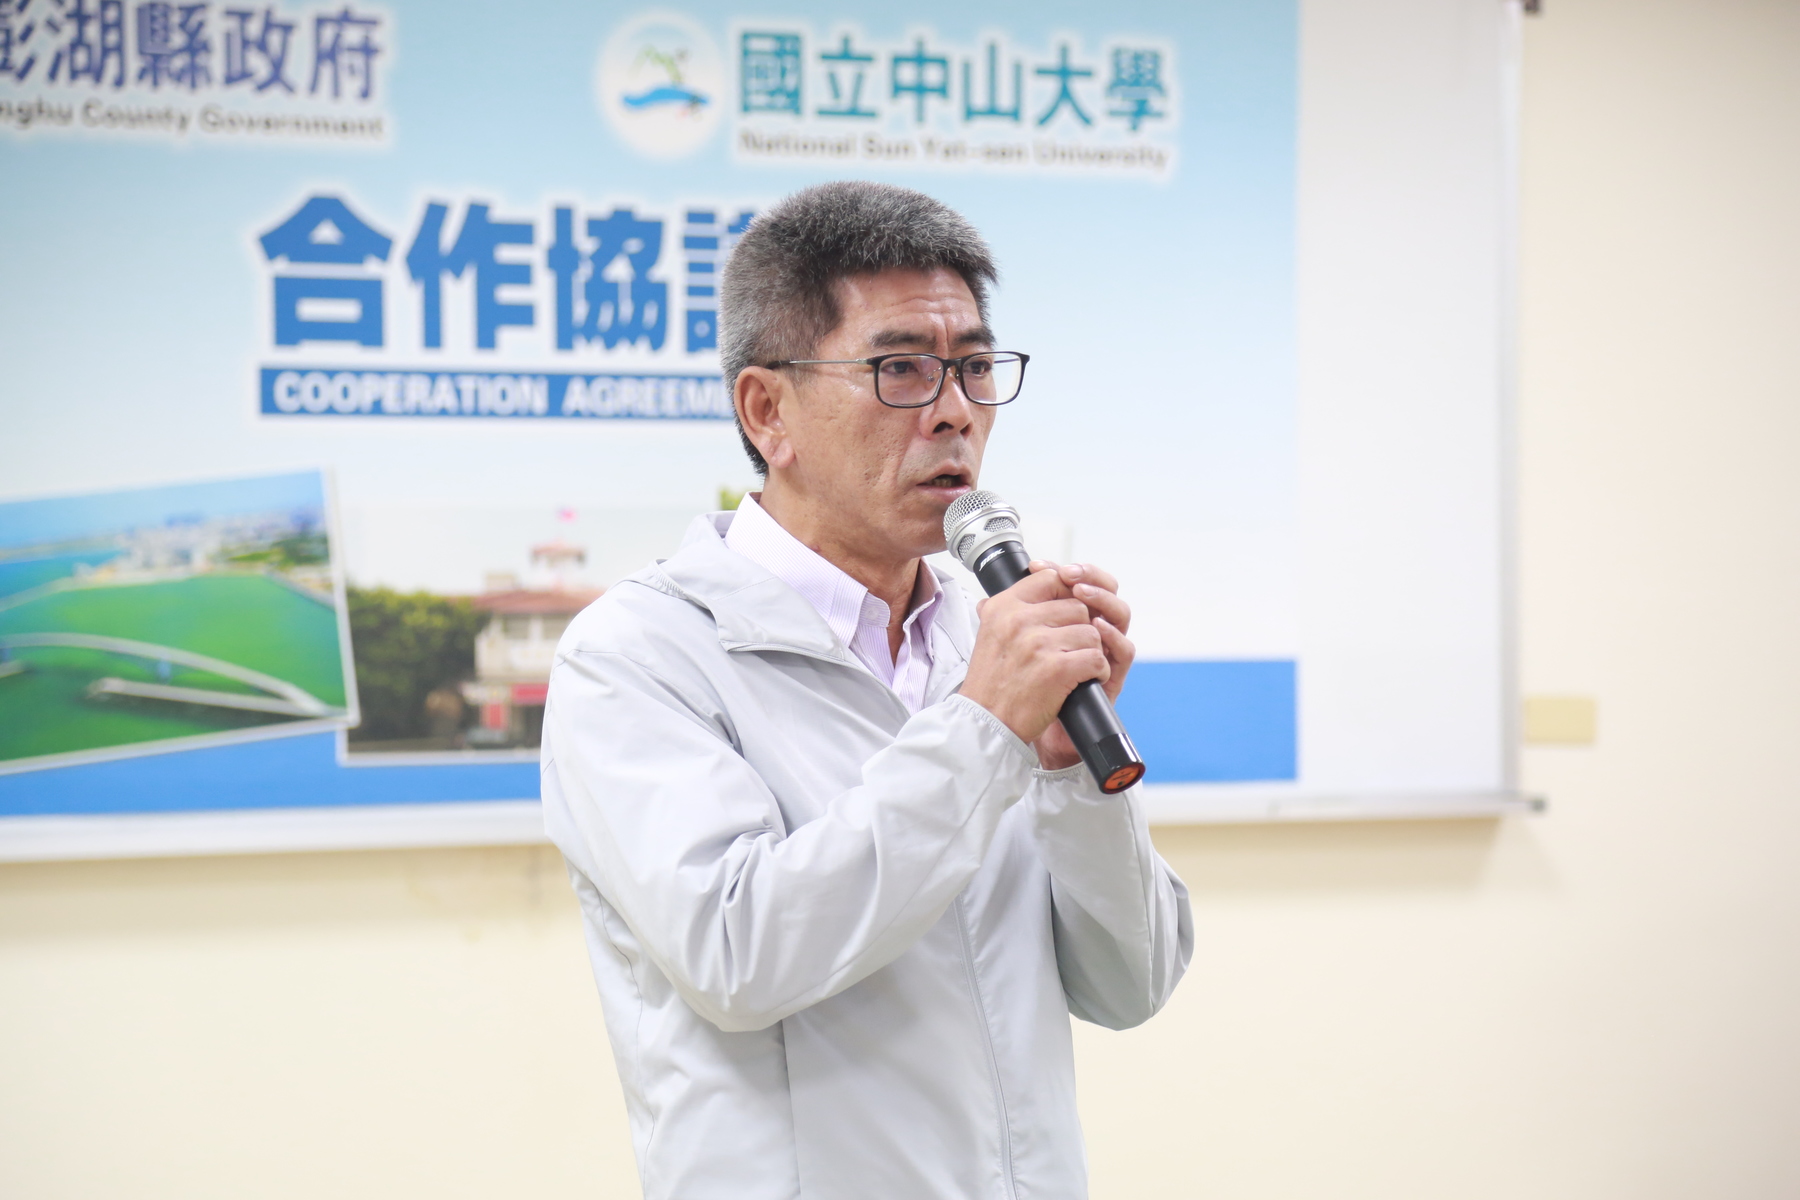 Member of the Legislative Yuan Yao Yang gave a speech and said that the NSYSU School of Post-Baccalaureate Medicine, if successfully established, will bring significant benefits to Penghu County residents; he gave full support to the project of NSYSU College of Medicine.